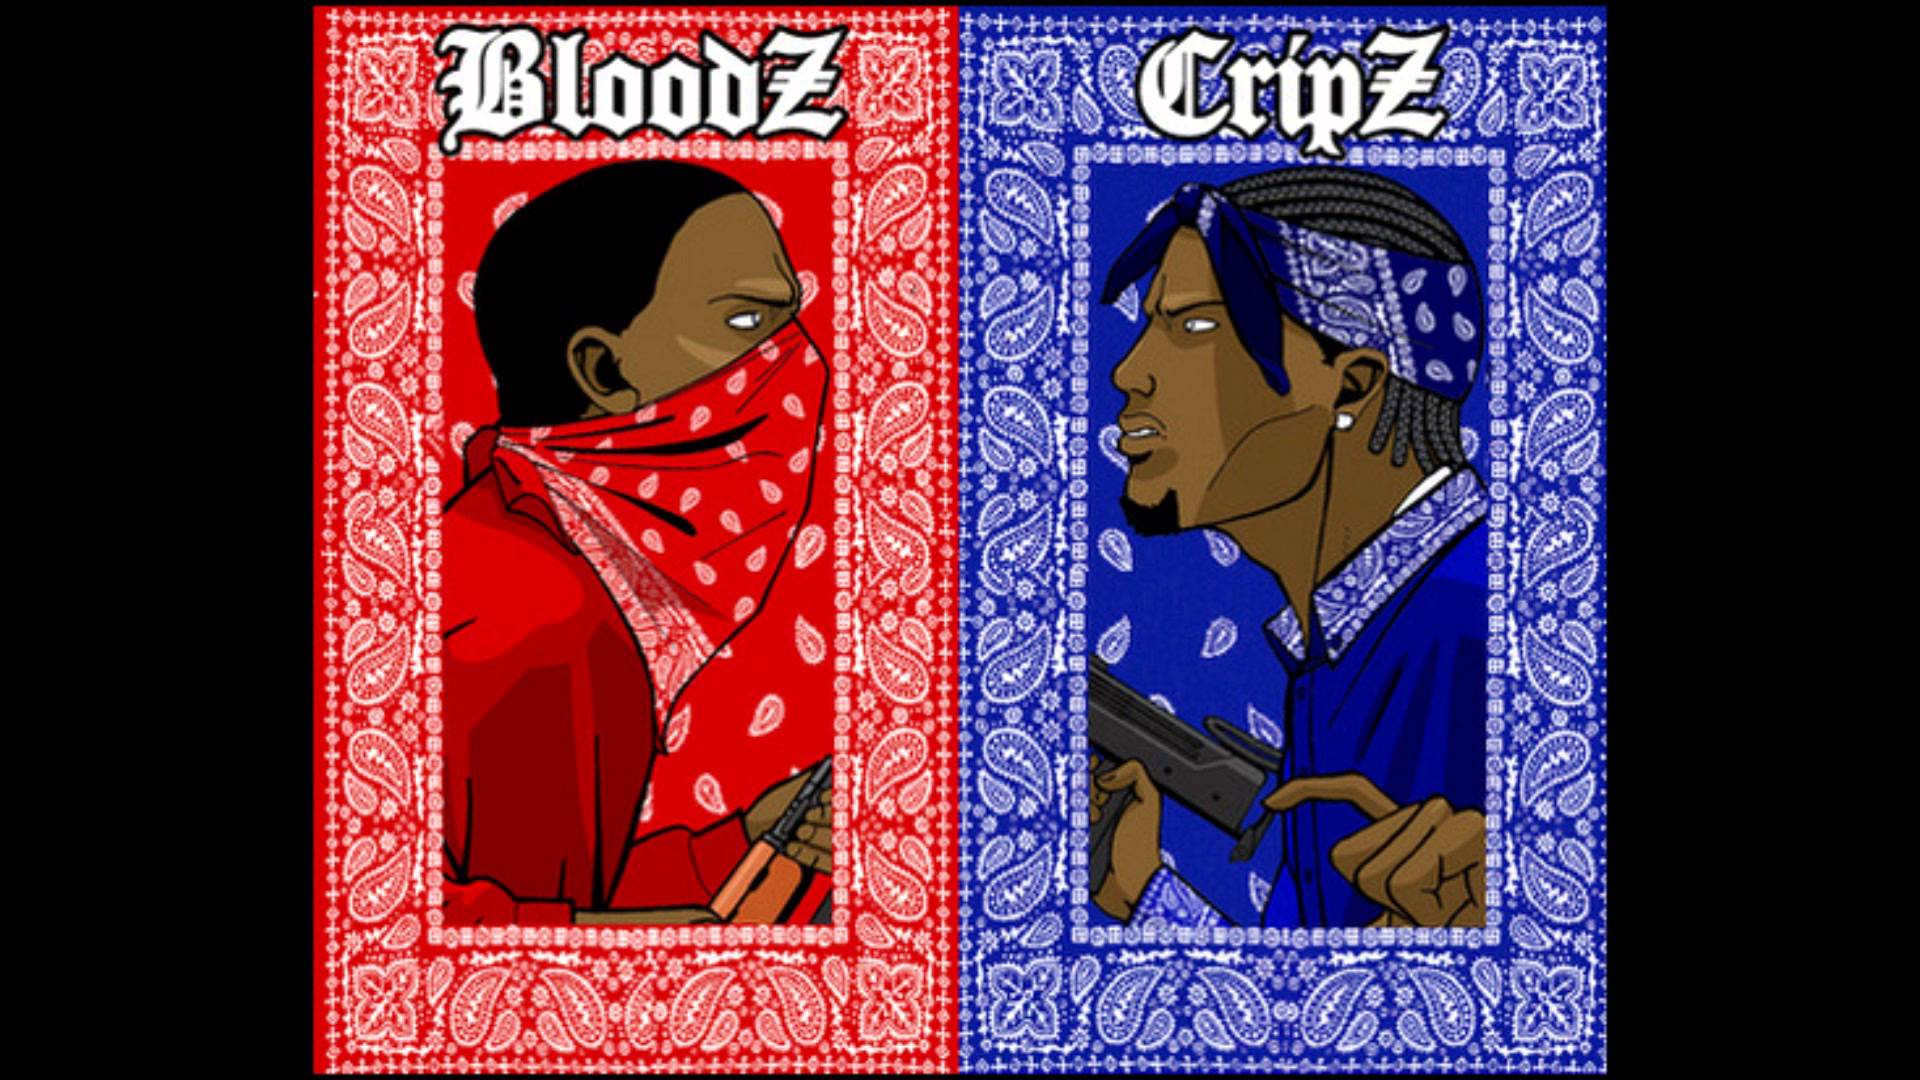 1920x1080, Res - Bloods And Crips , HD Wallpaper & Backgrounds